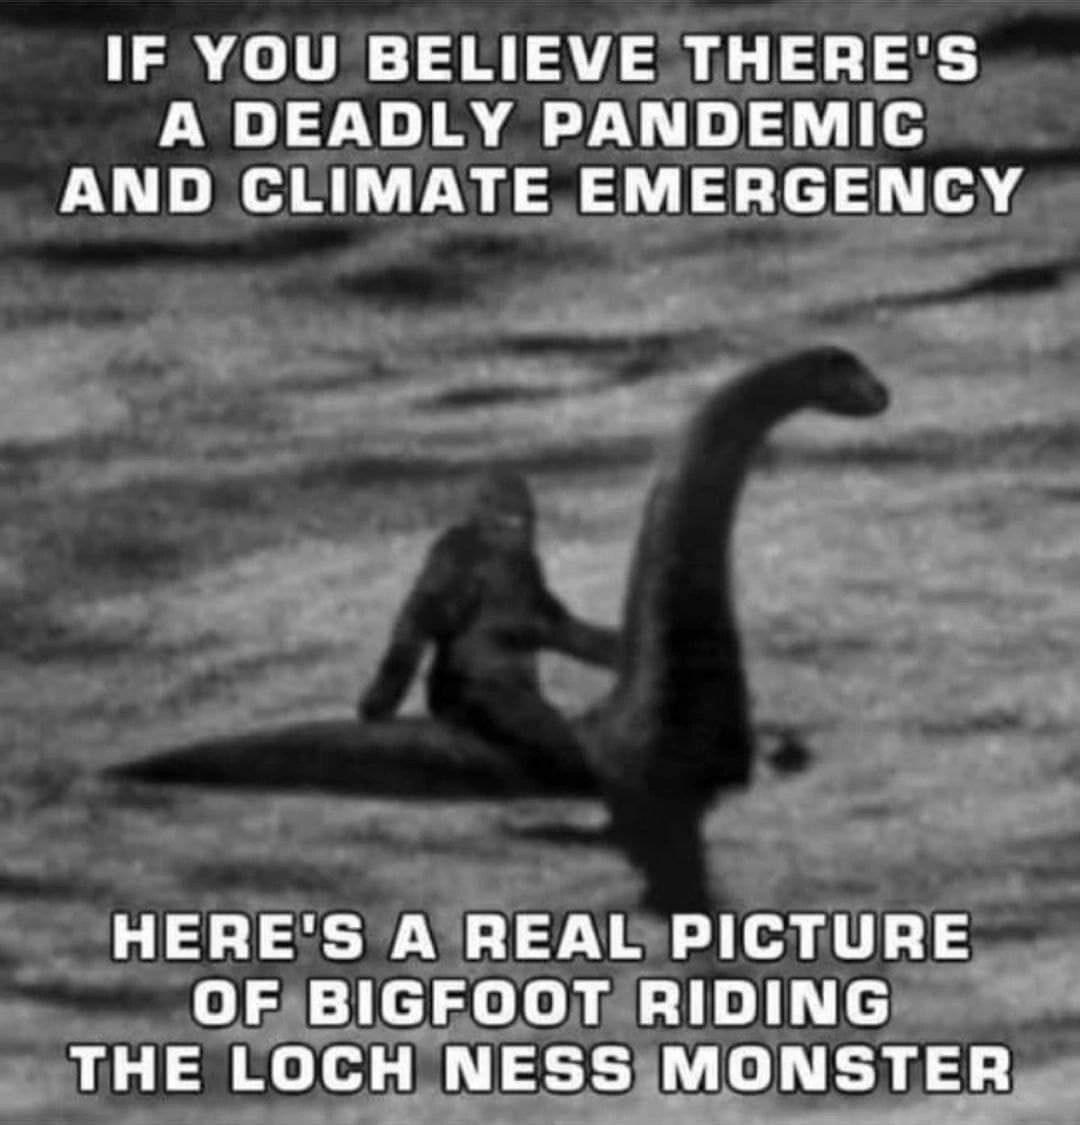 Real Picture of Bigfoot riding Lock Ness Monster